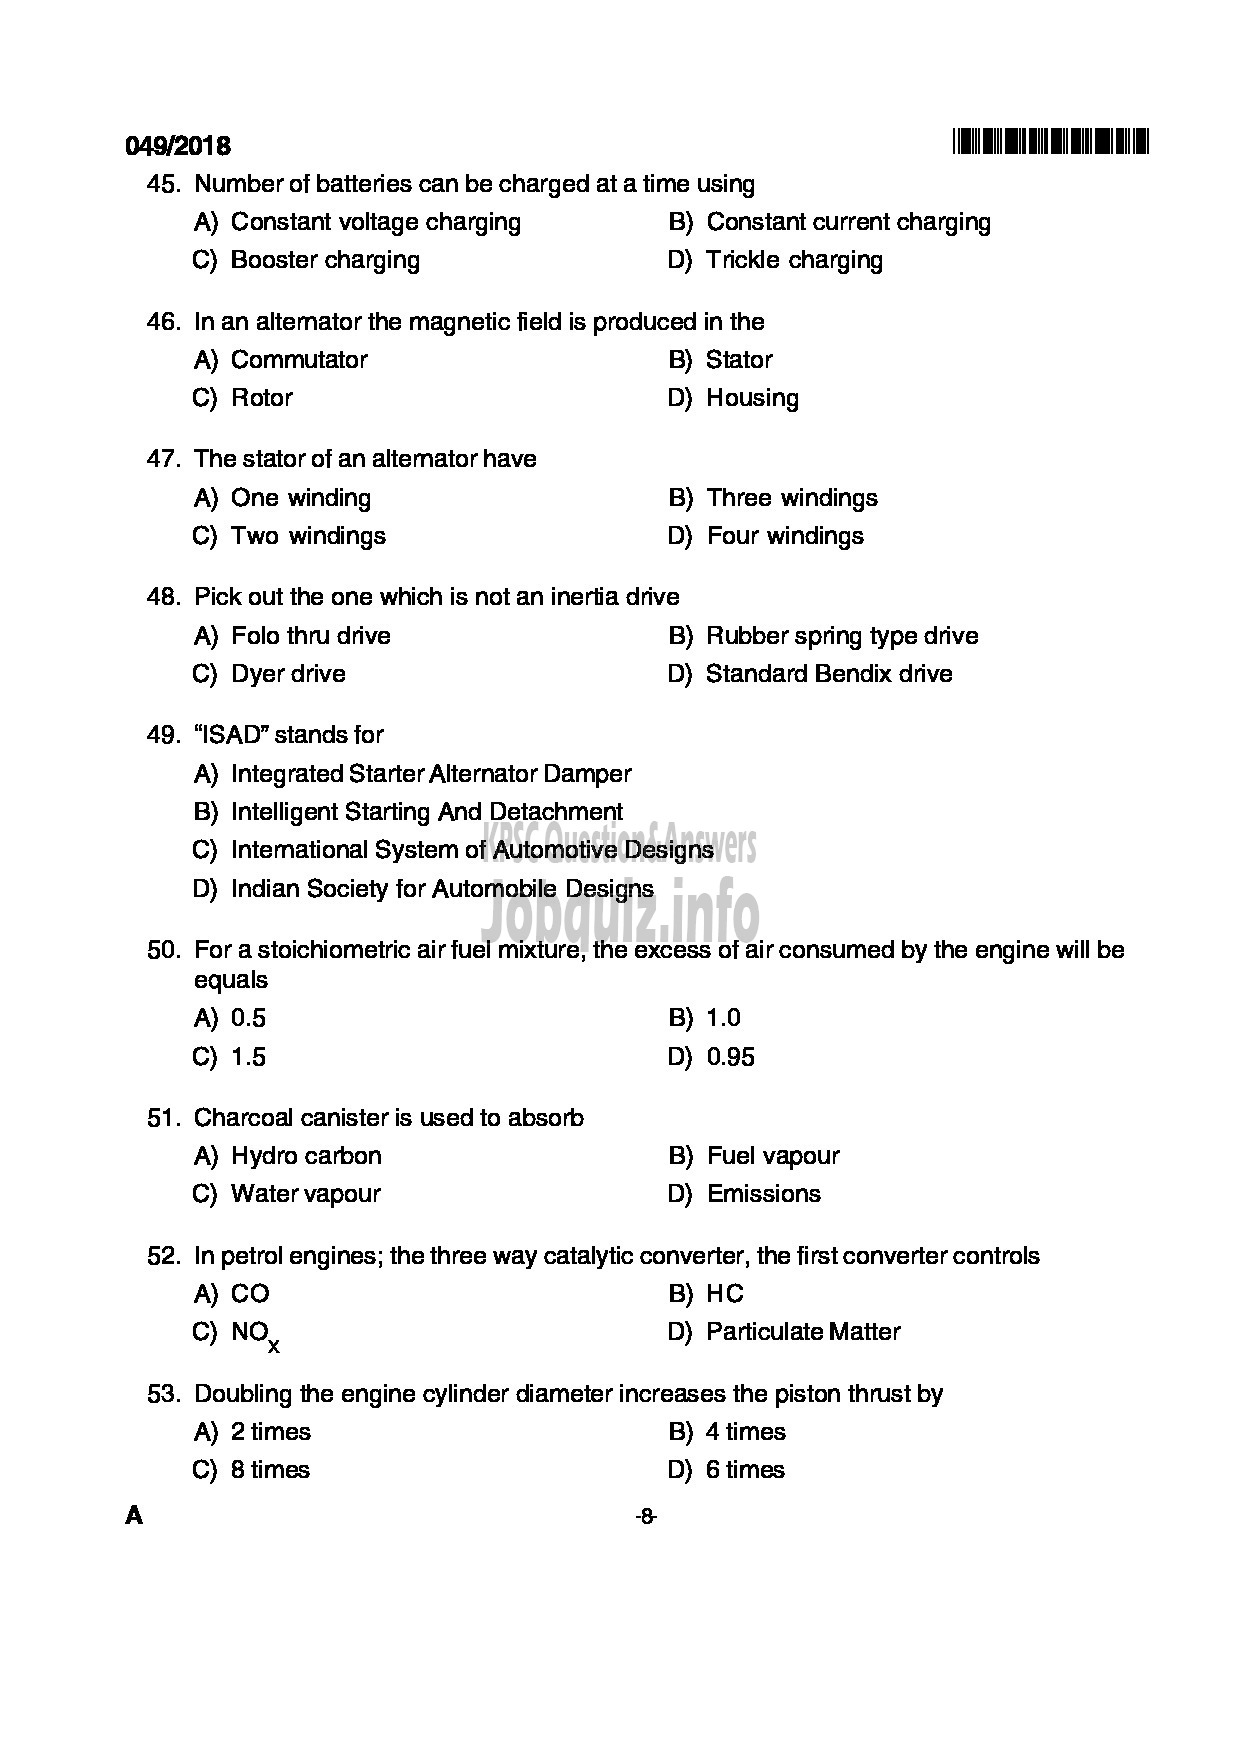 Kerala PSC Question Paper - VOCATIONAL INSTRUCTOR IN MAINTENANCE AND REPAIRS OF AUTOMOBILES VOCATIONAL HIGHER SECONDARY EDUCATION-8